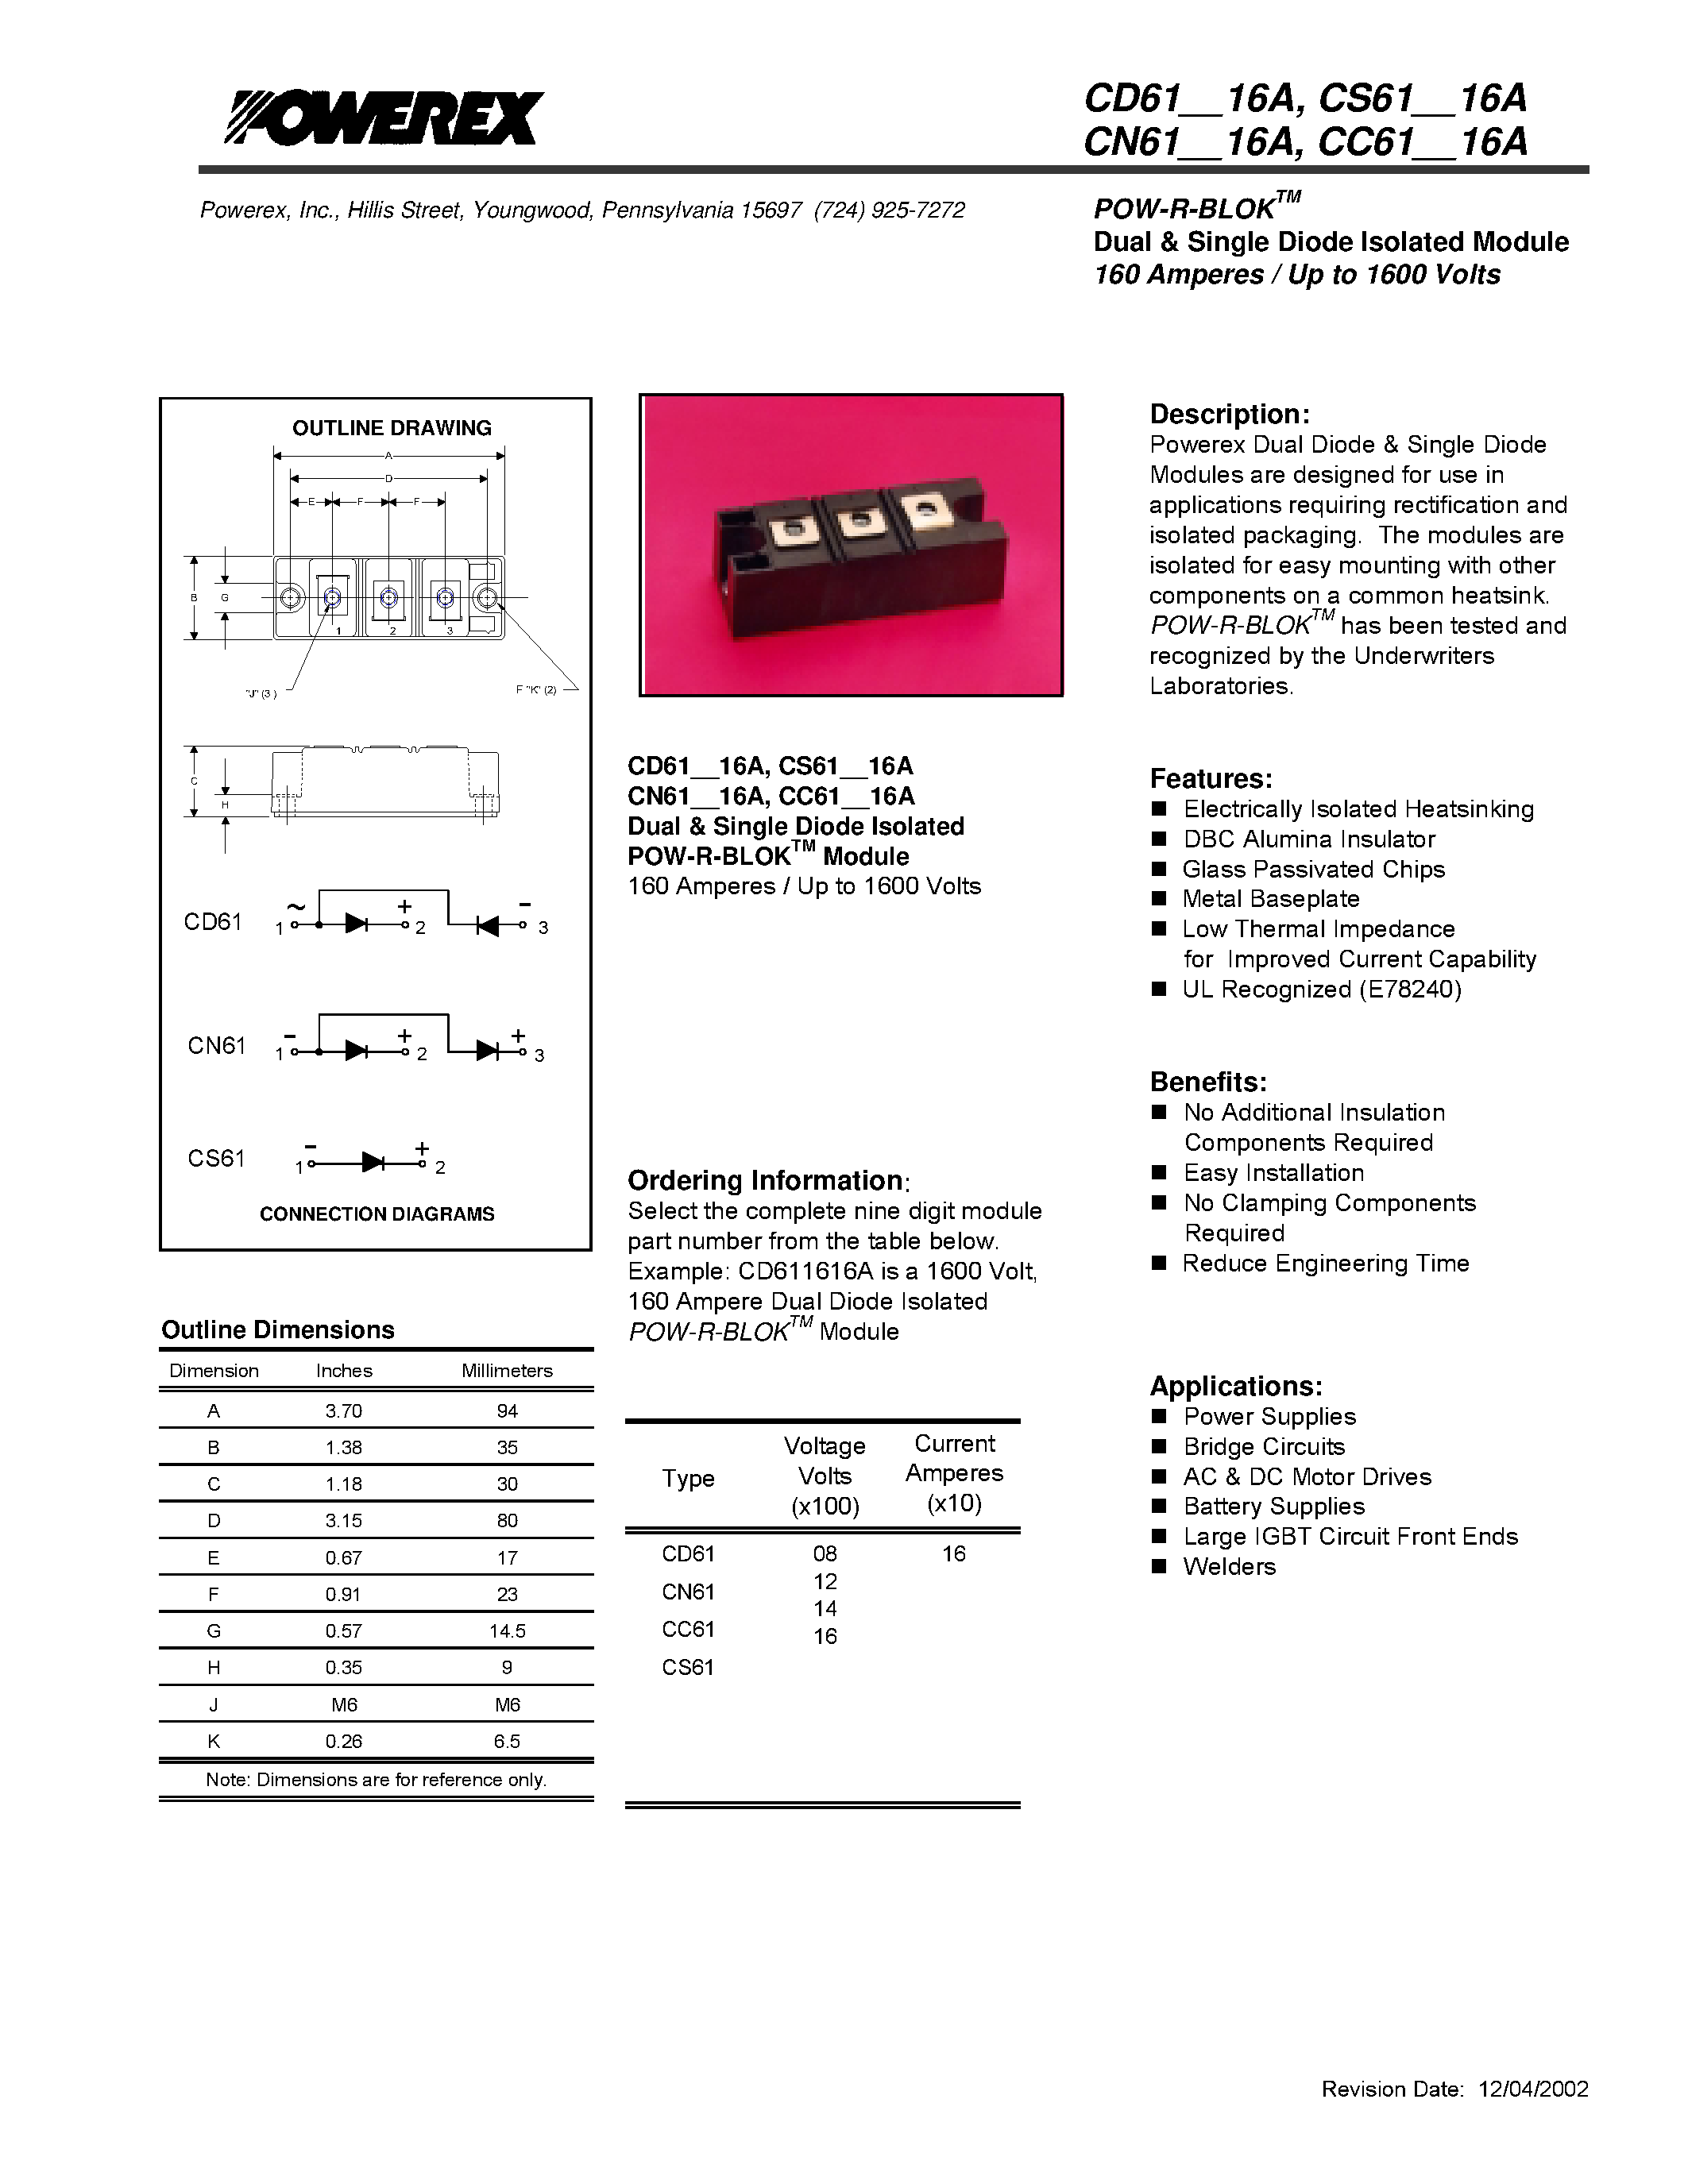 Datasheet CD610816A - POW-R-BLOK Dual & Single Diode Isolated Module 160 Amperes / Up to 1600 Volts page 1